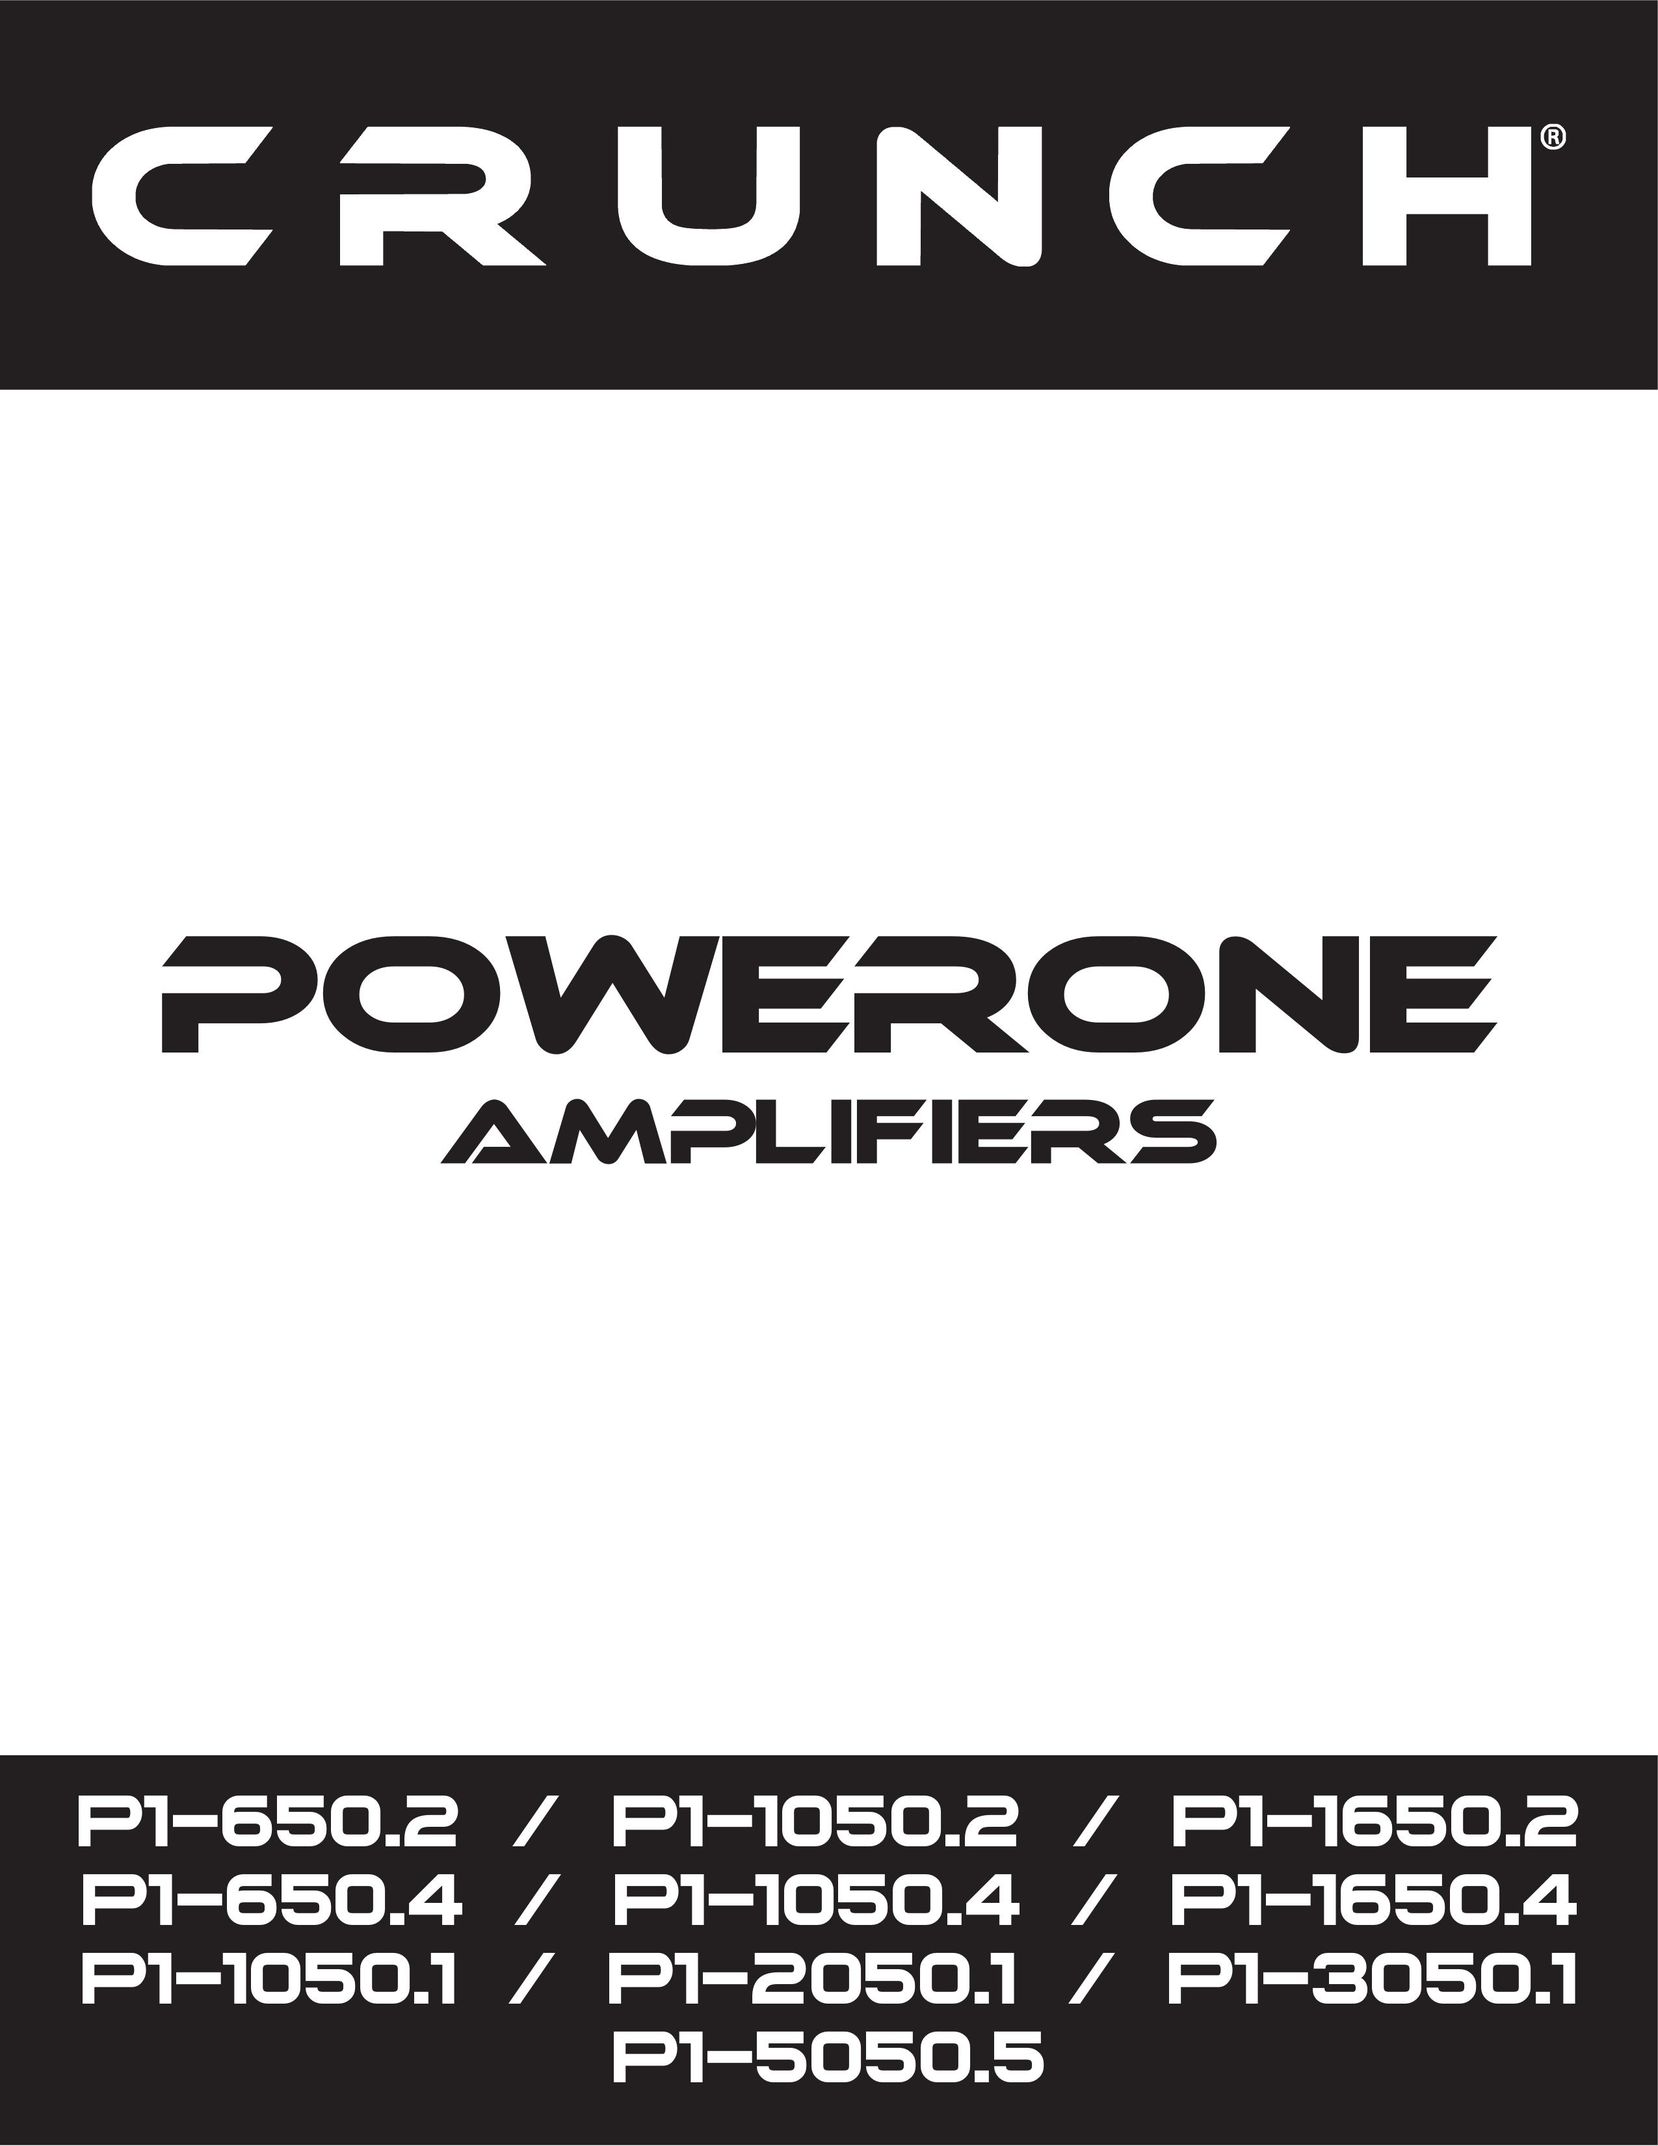 Crunch P1-1050.1 Stereo Amplifier User Manual